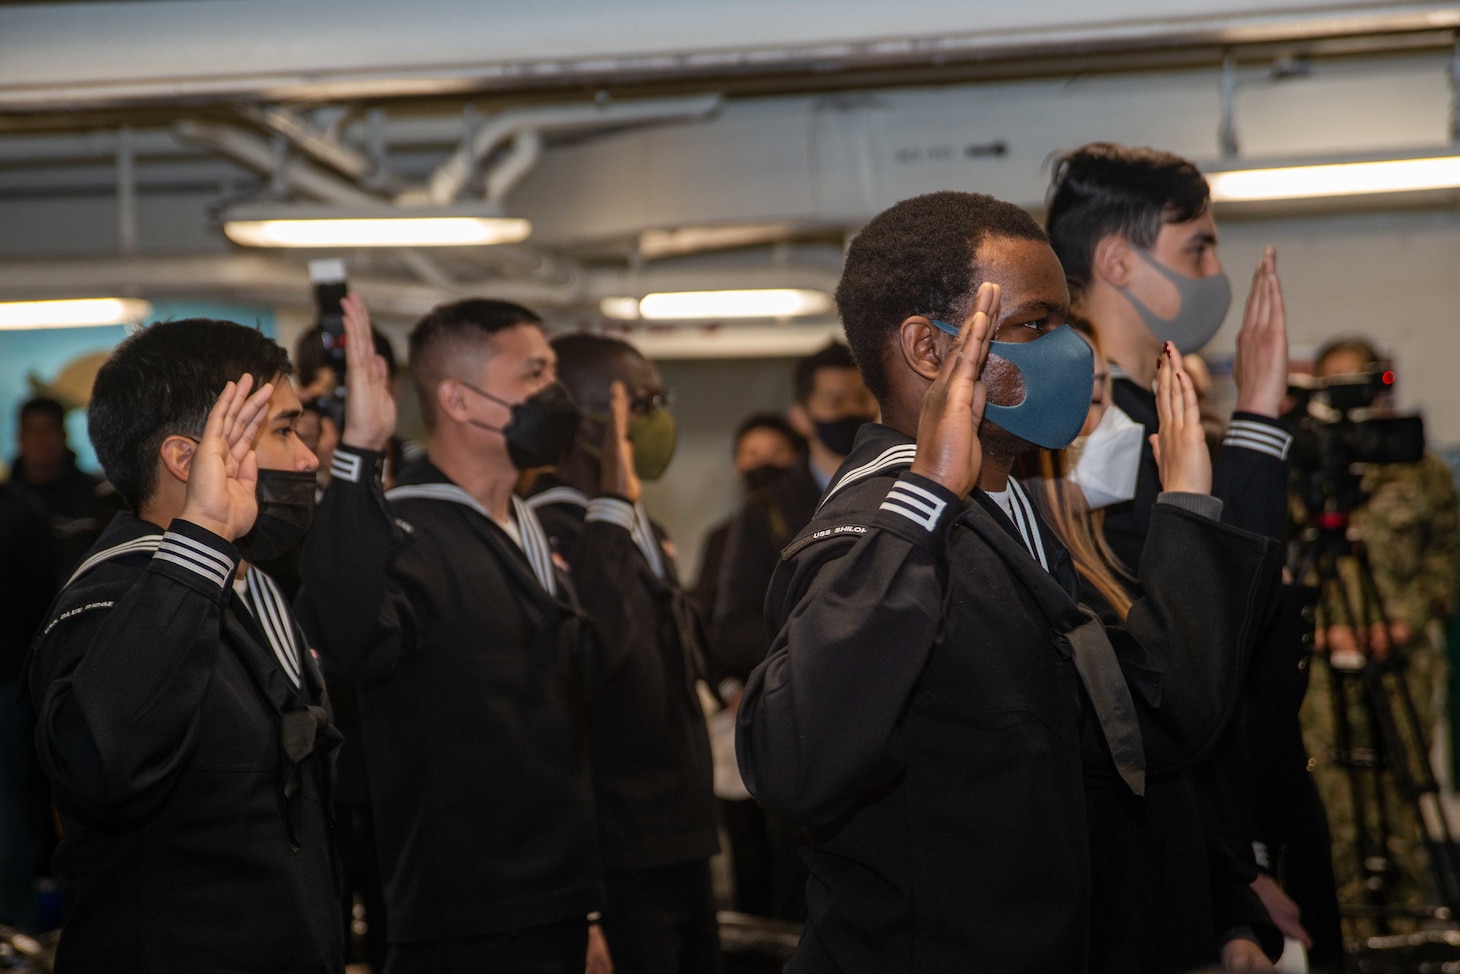 YOKOSUKA, Japan (Feb. 17, 2022) Candidates take the oath of citizenship during a naturalization ceremony in the forecastle of the U.S. Navy’s only forward-deployed aircraft carrier USS Ronald Reagan (CVN 76). During the ceremony, 17 candidates from 11 different countries became American citizens and the Honorable Rahm Emanuel, U.S. ambassador to Japan, served as the keynote speaker. Ronald Reagan, the flagship of Carrier Strike Group 5, provides a combat-ready force that protects and defends the United States, and supports alliances, partnerships and collective maritime interests in the Indo-Pacific region. (U.S. Navy photo by Mass Communication Specialist 3rd Class Gray Gibson)